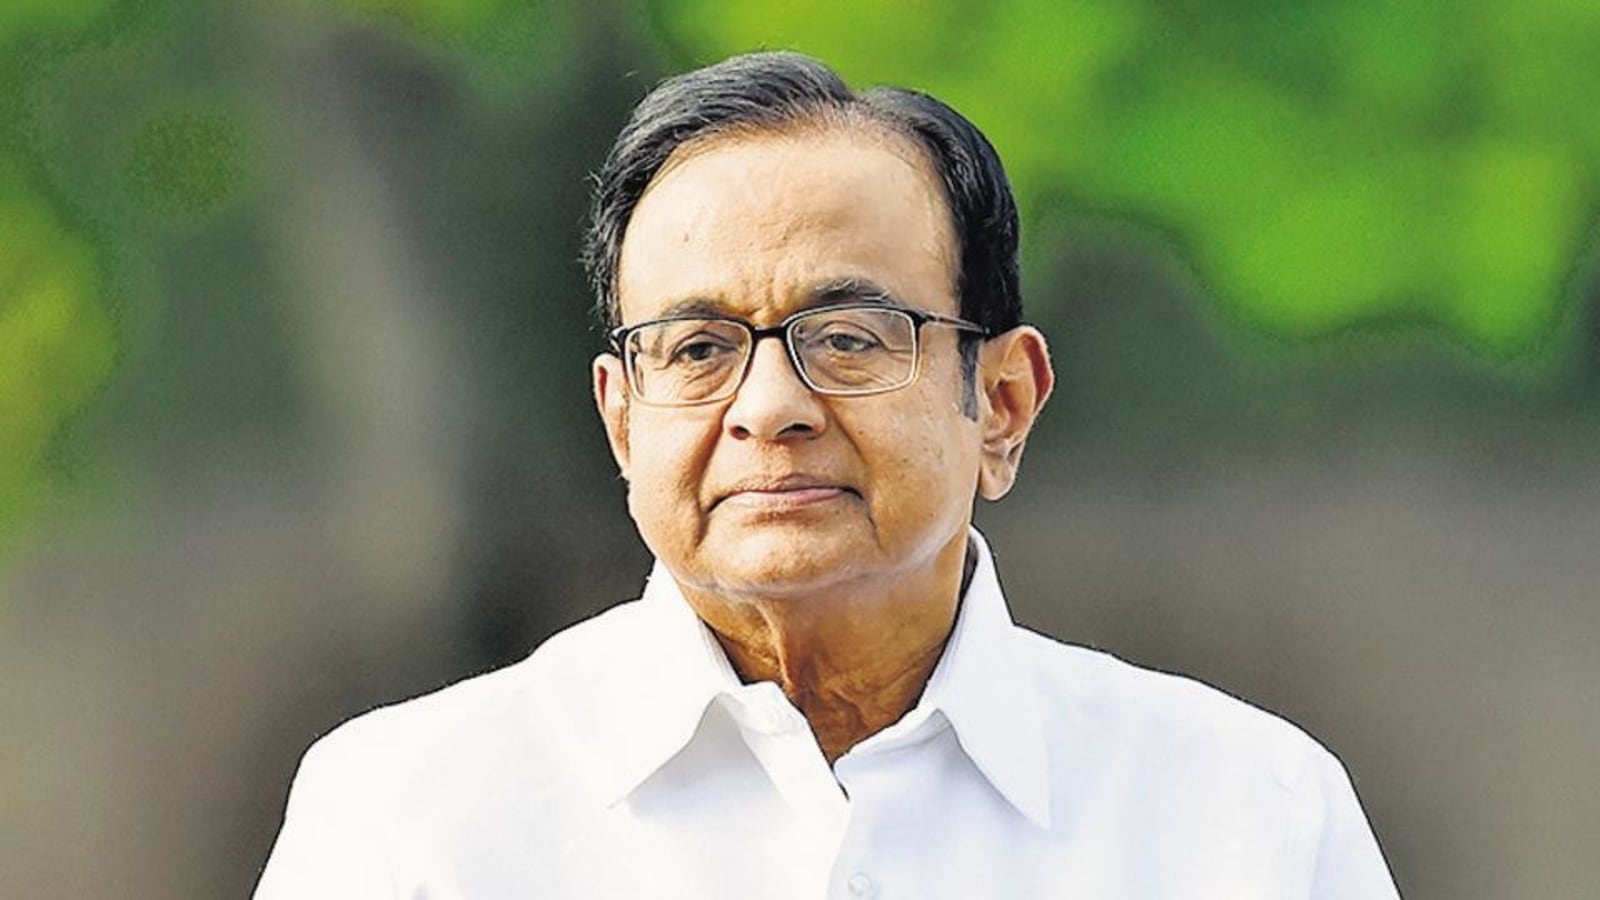 Former Union minister P Chidambaram likely to face court hearing ...